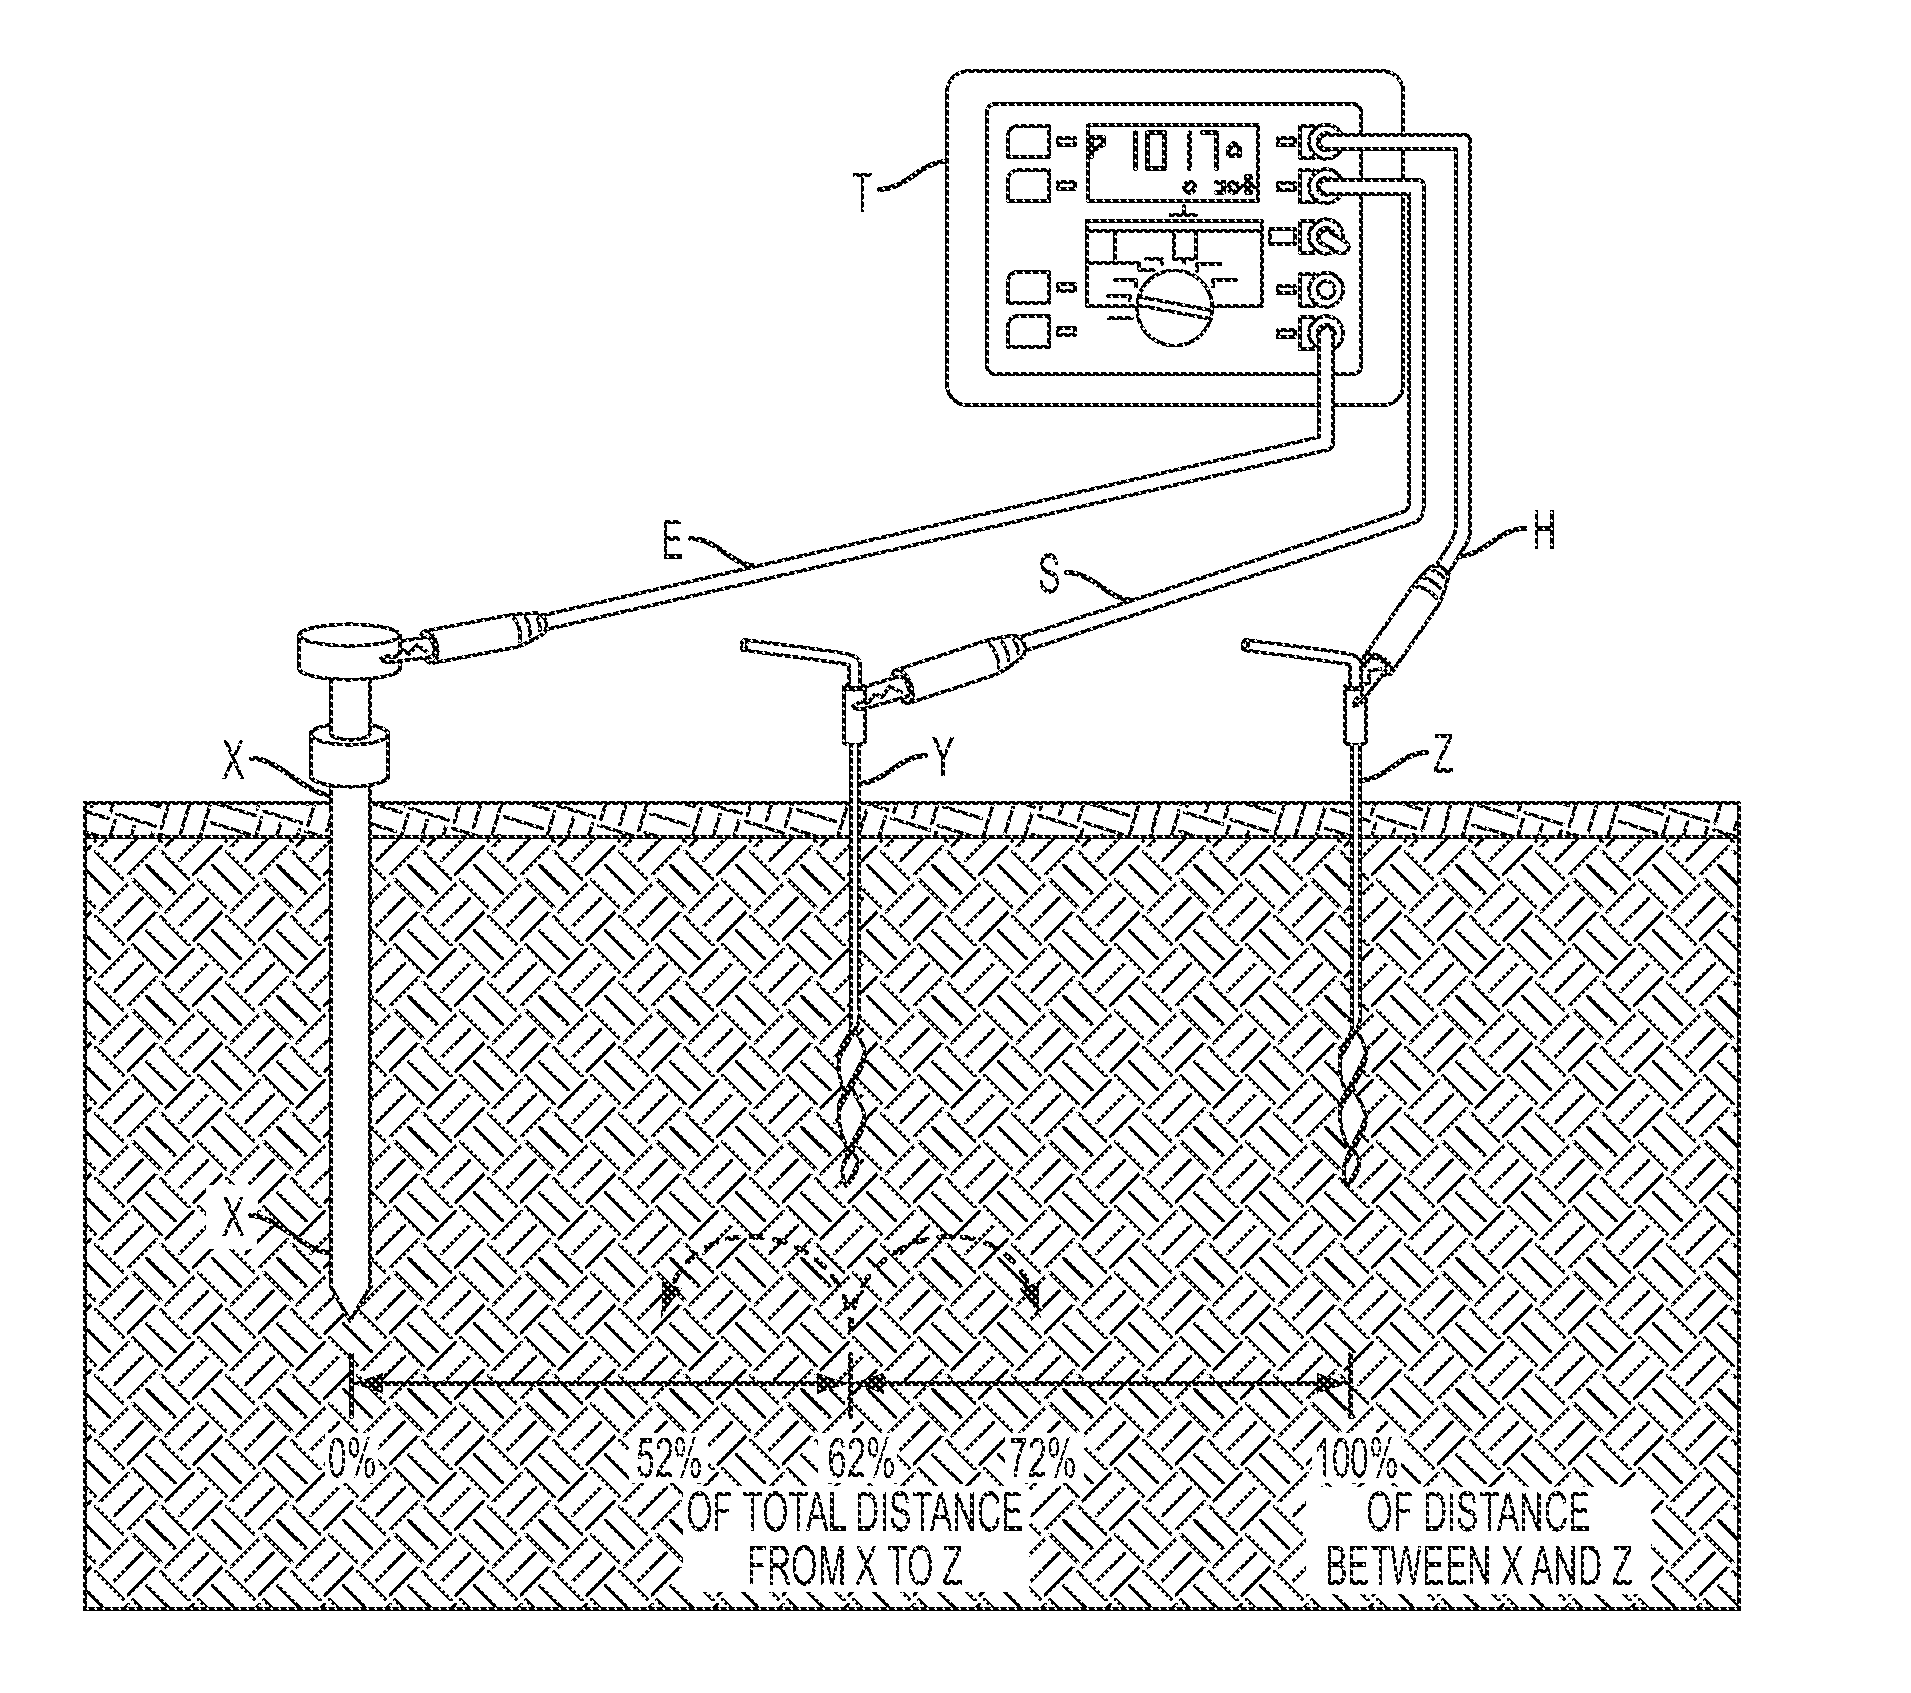 Method of Measuring Earth Ground Resistance of a Pylon